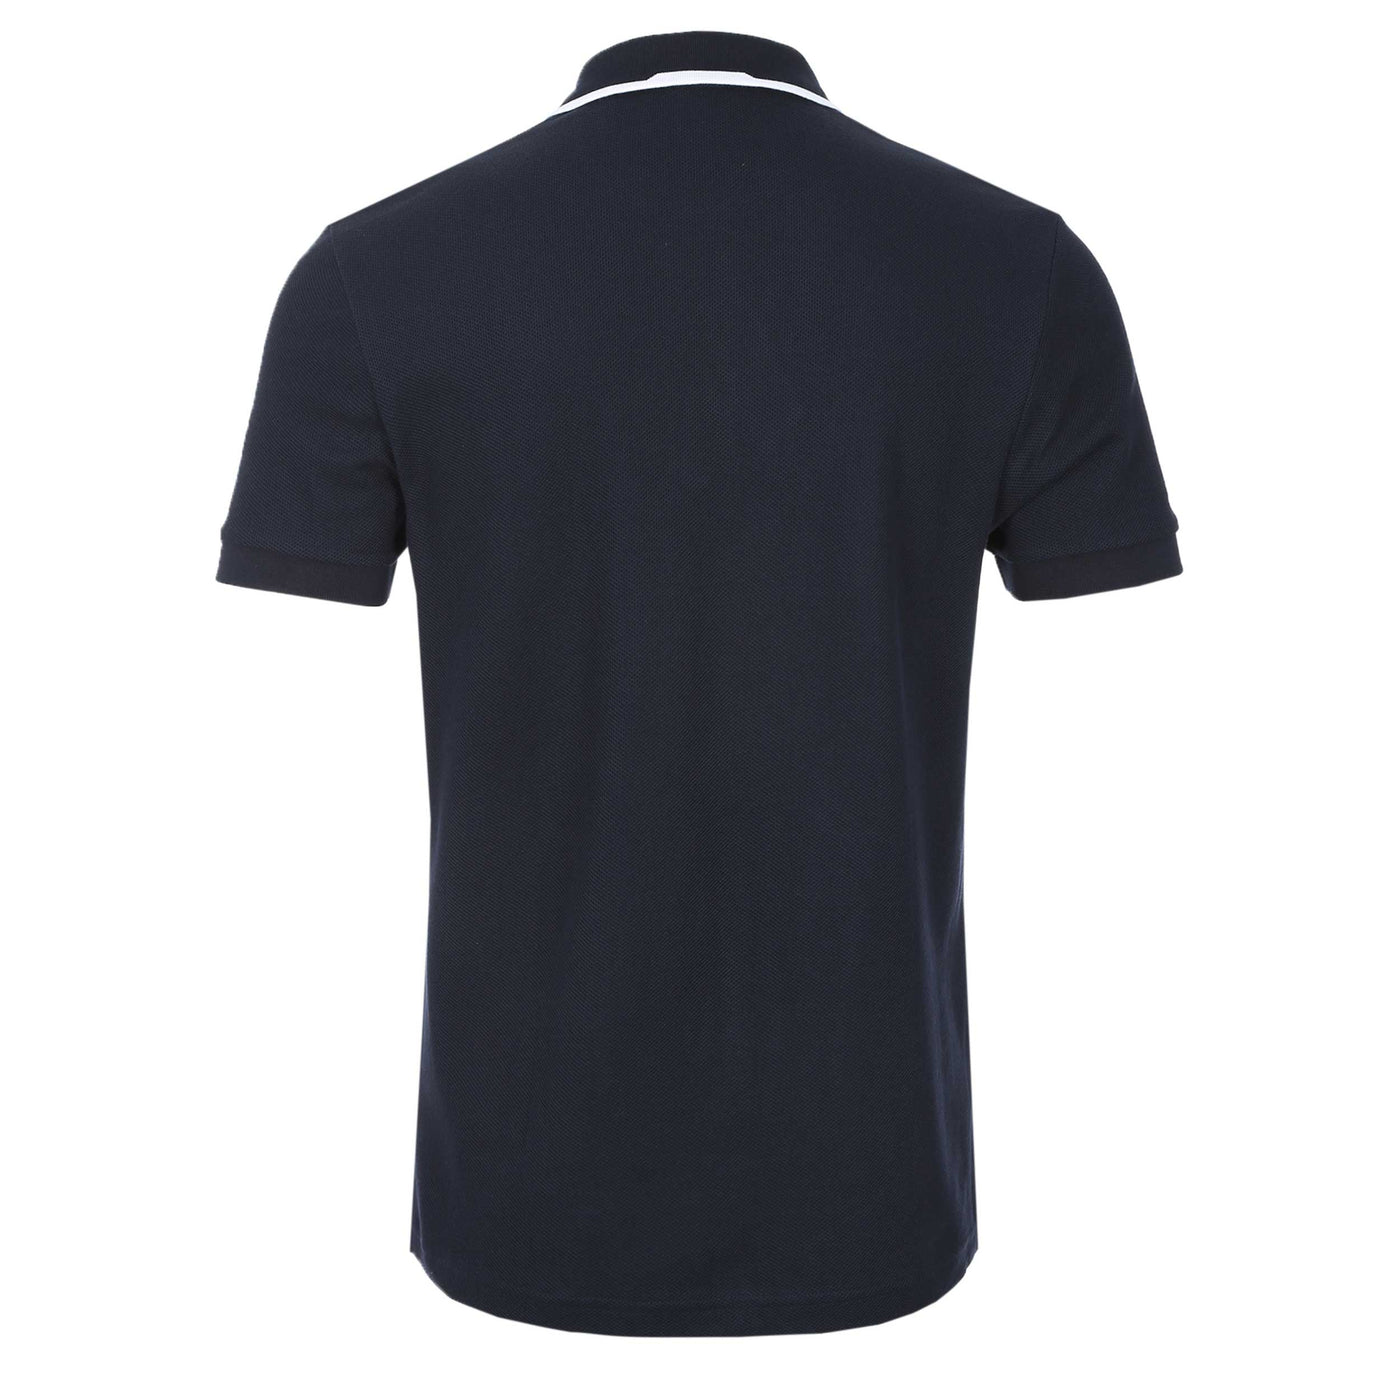 BOSS Paddy 2 Polo Shirt in Navy Back